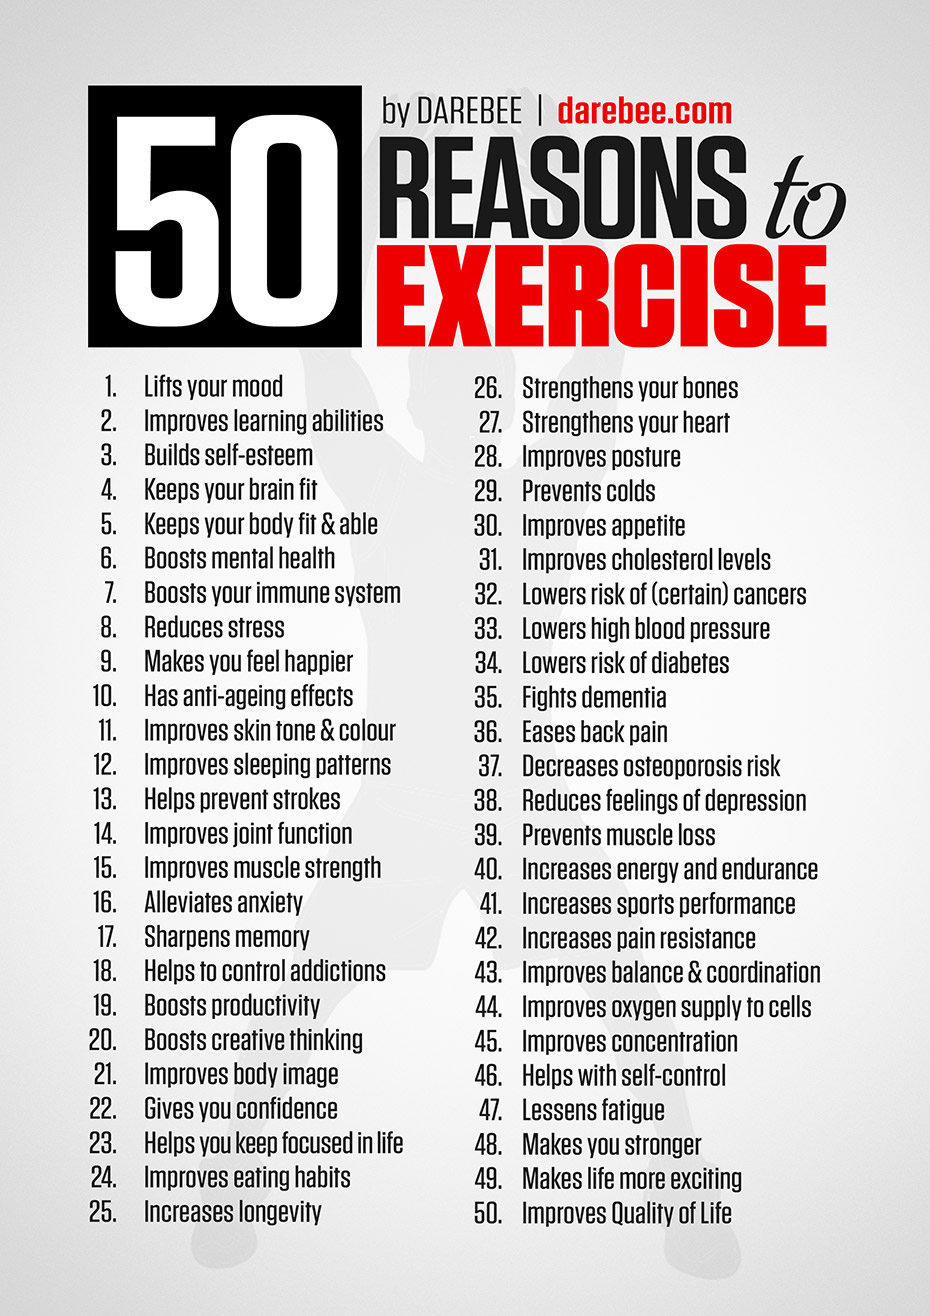 https://darebee.com/images/motivation/50reasons-to-exercise.jpg